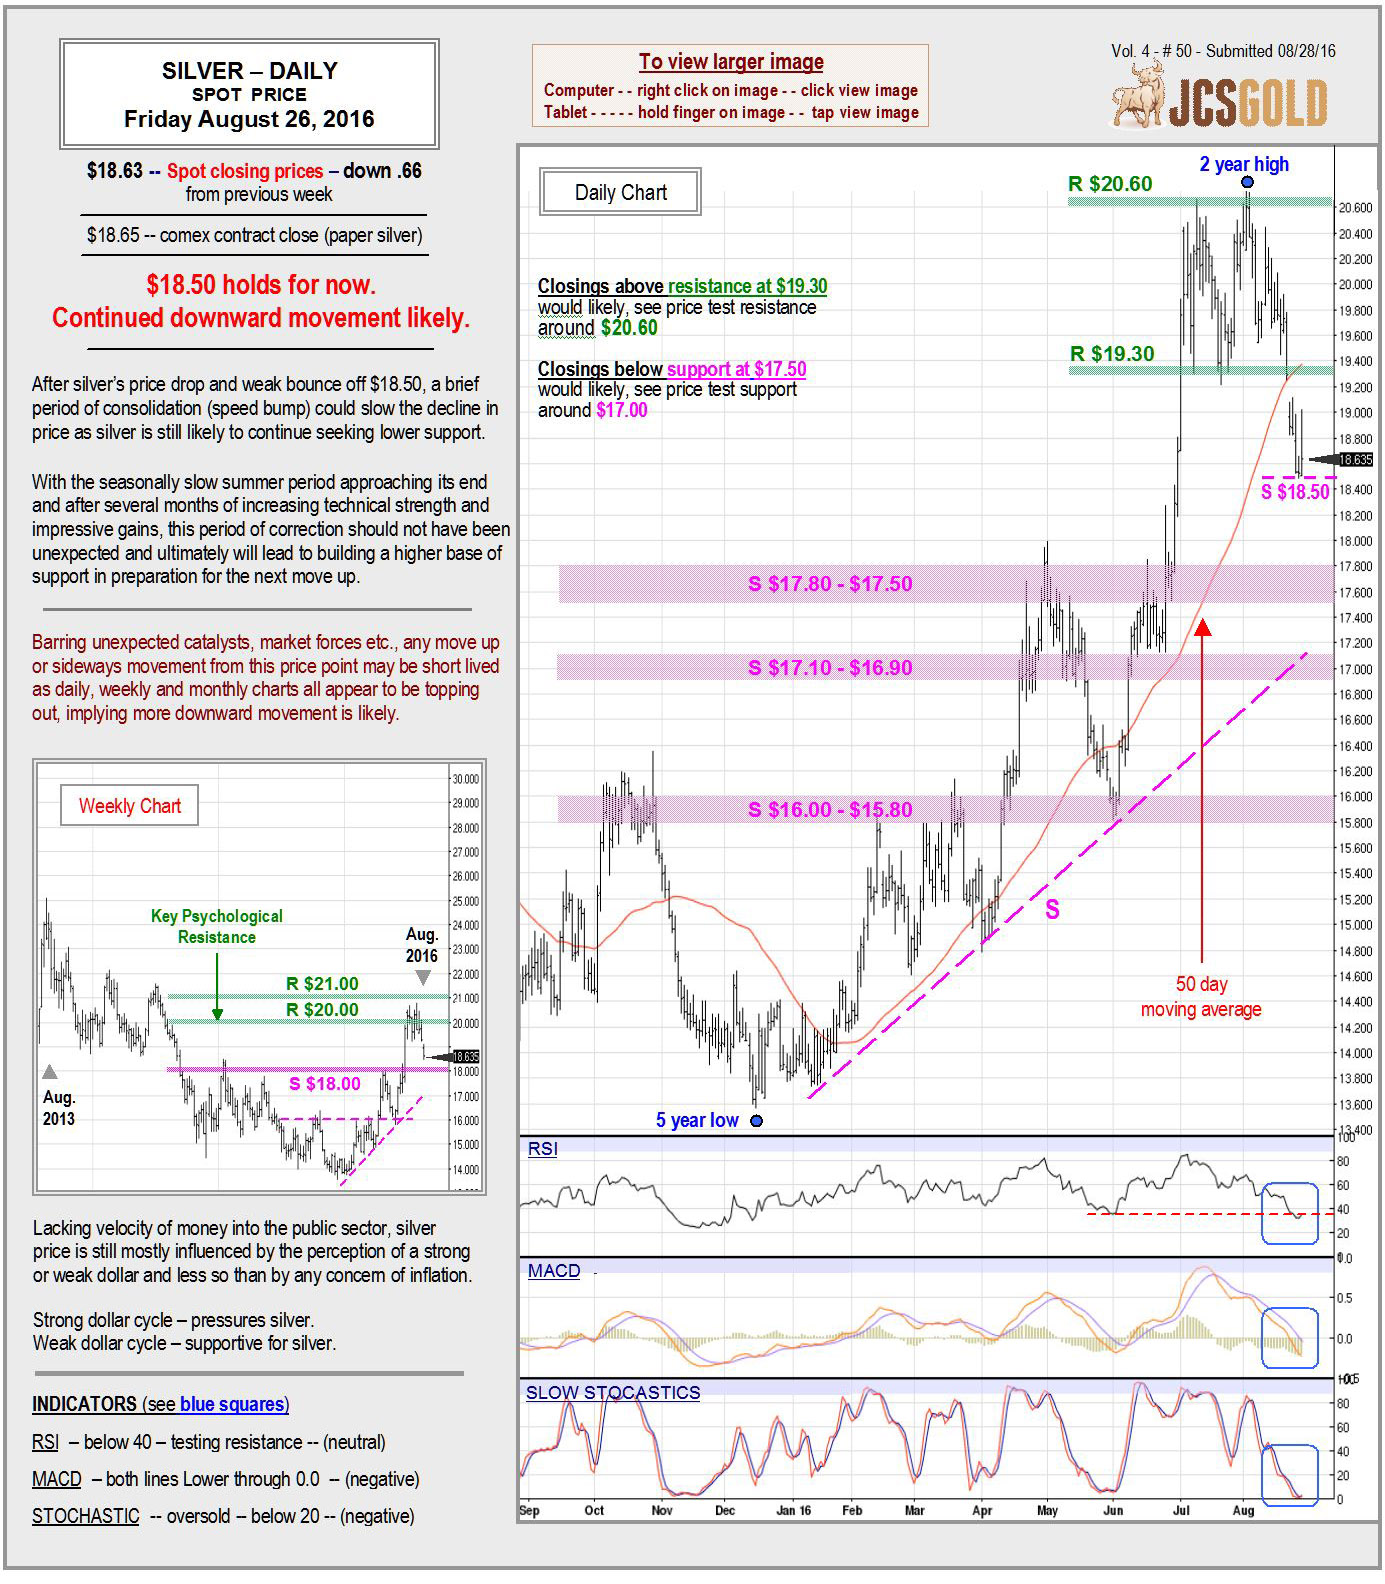 August 26, 2016 chart & commentary